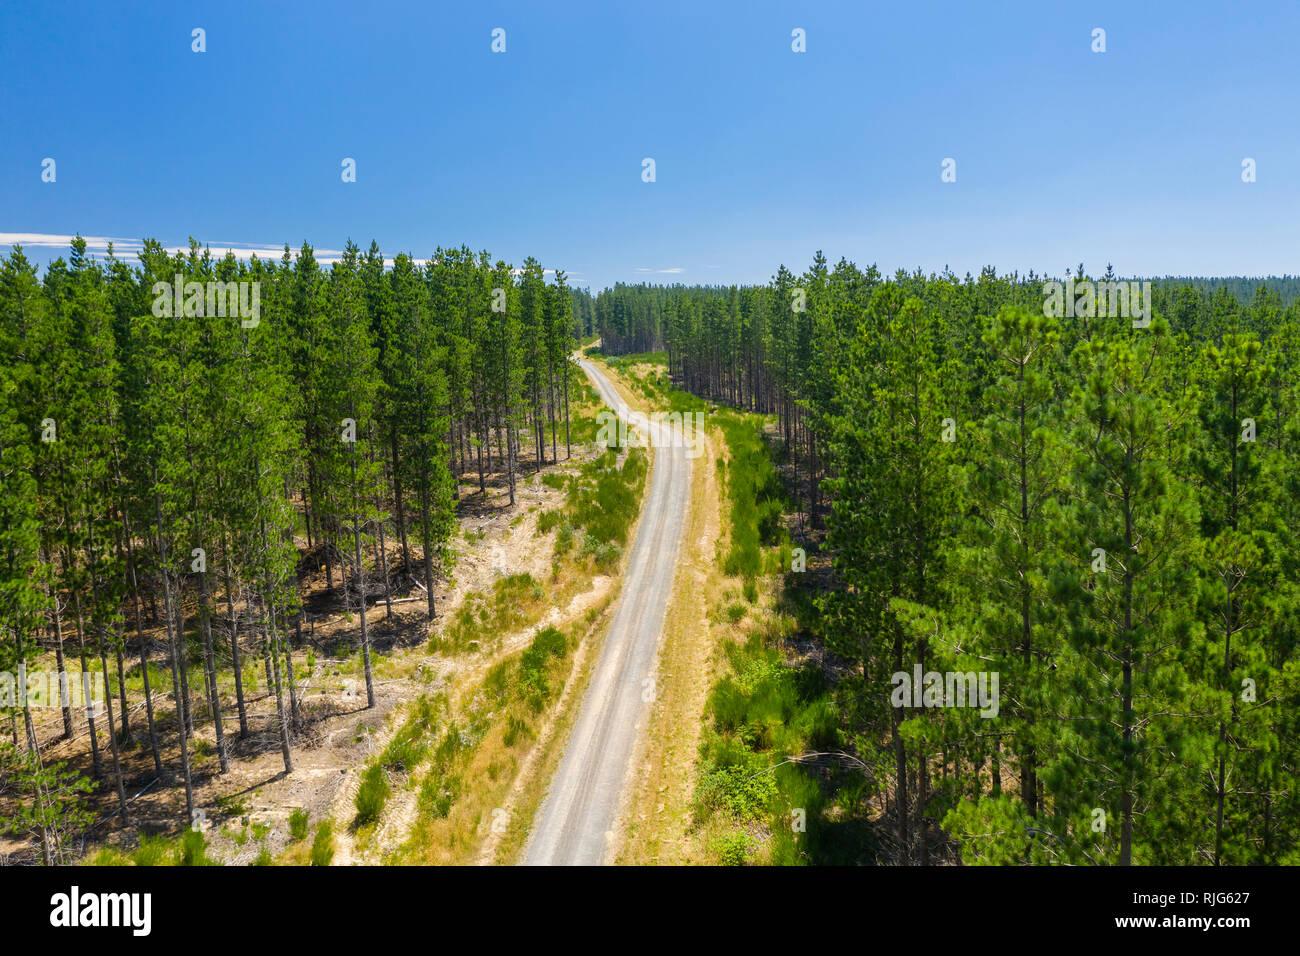 Aerial view of a forest Stock Photo